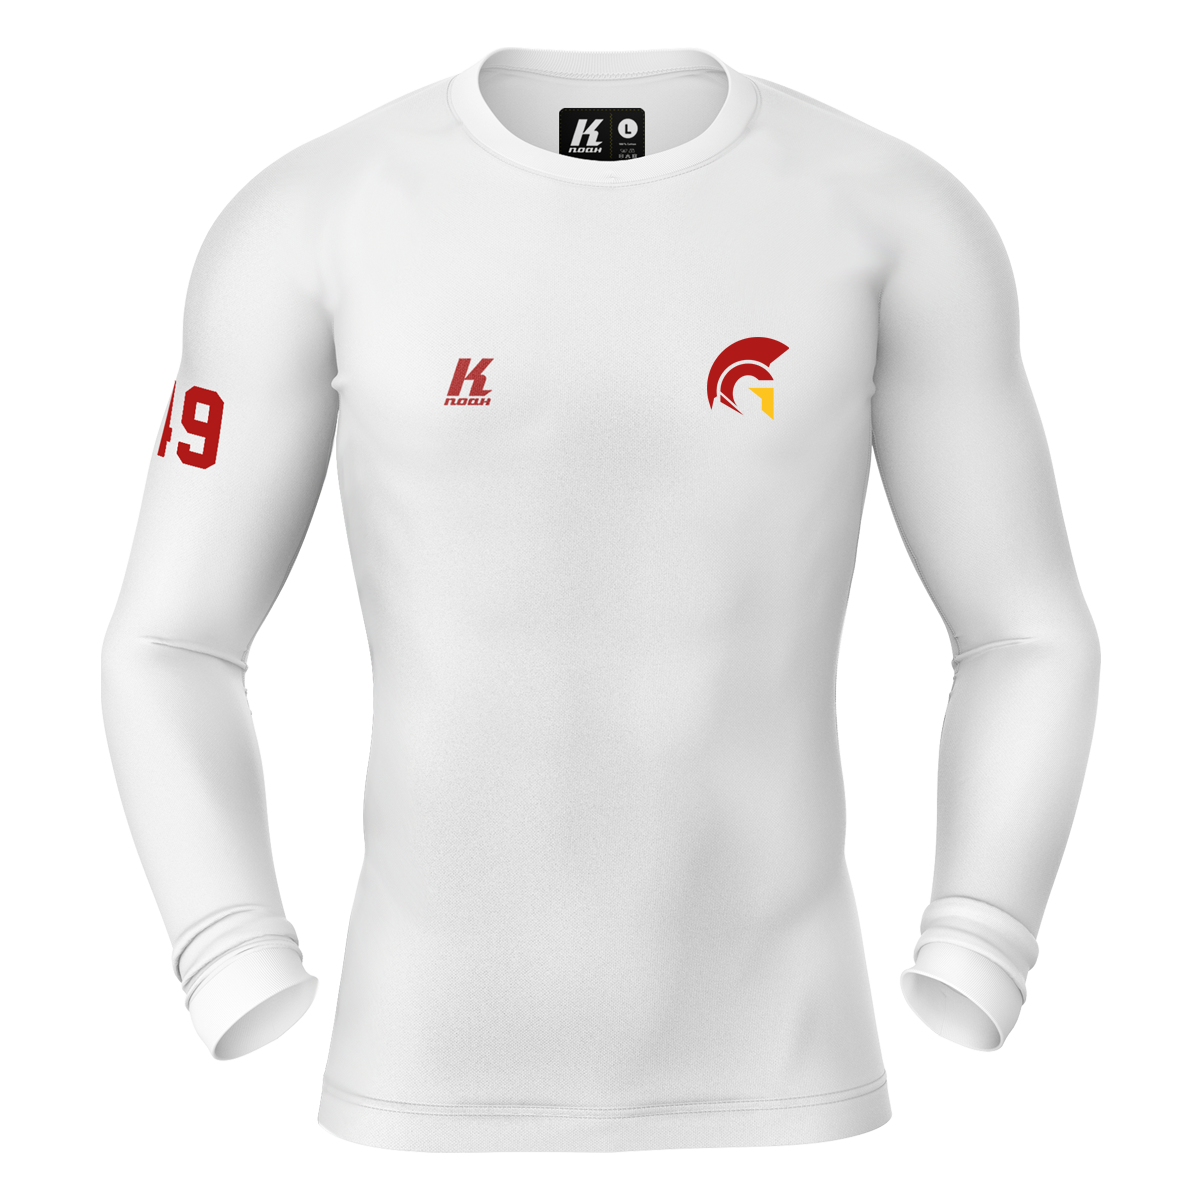 Gladiators K.Tech Compression Longsleeve Shirt white with Playernumber/Initials